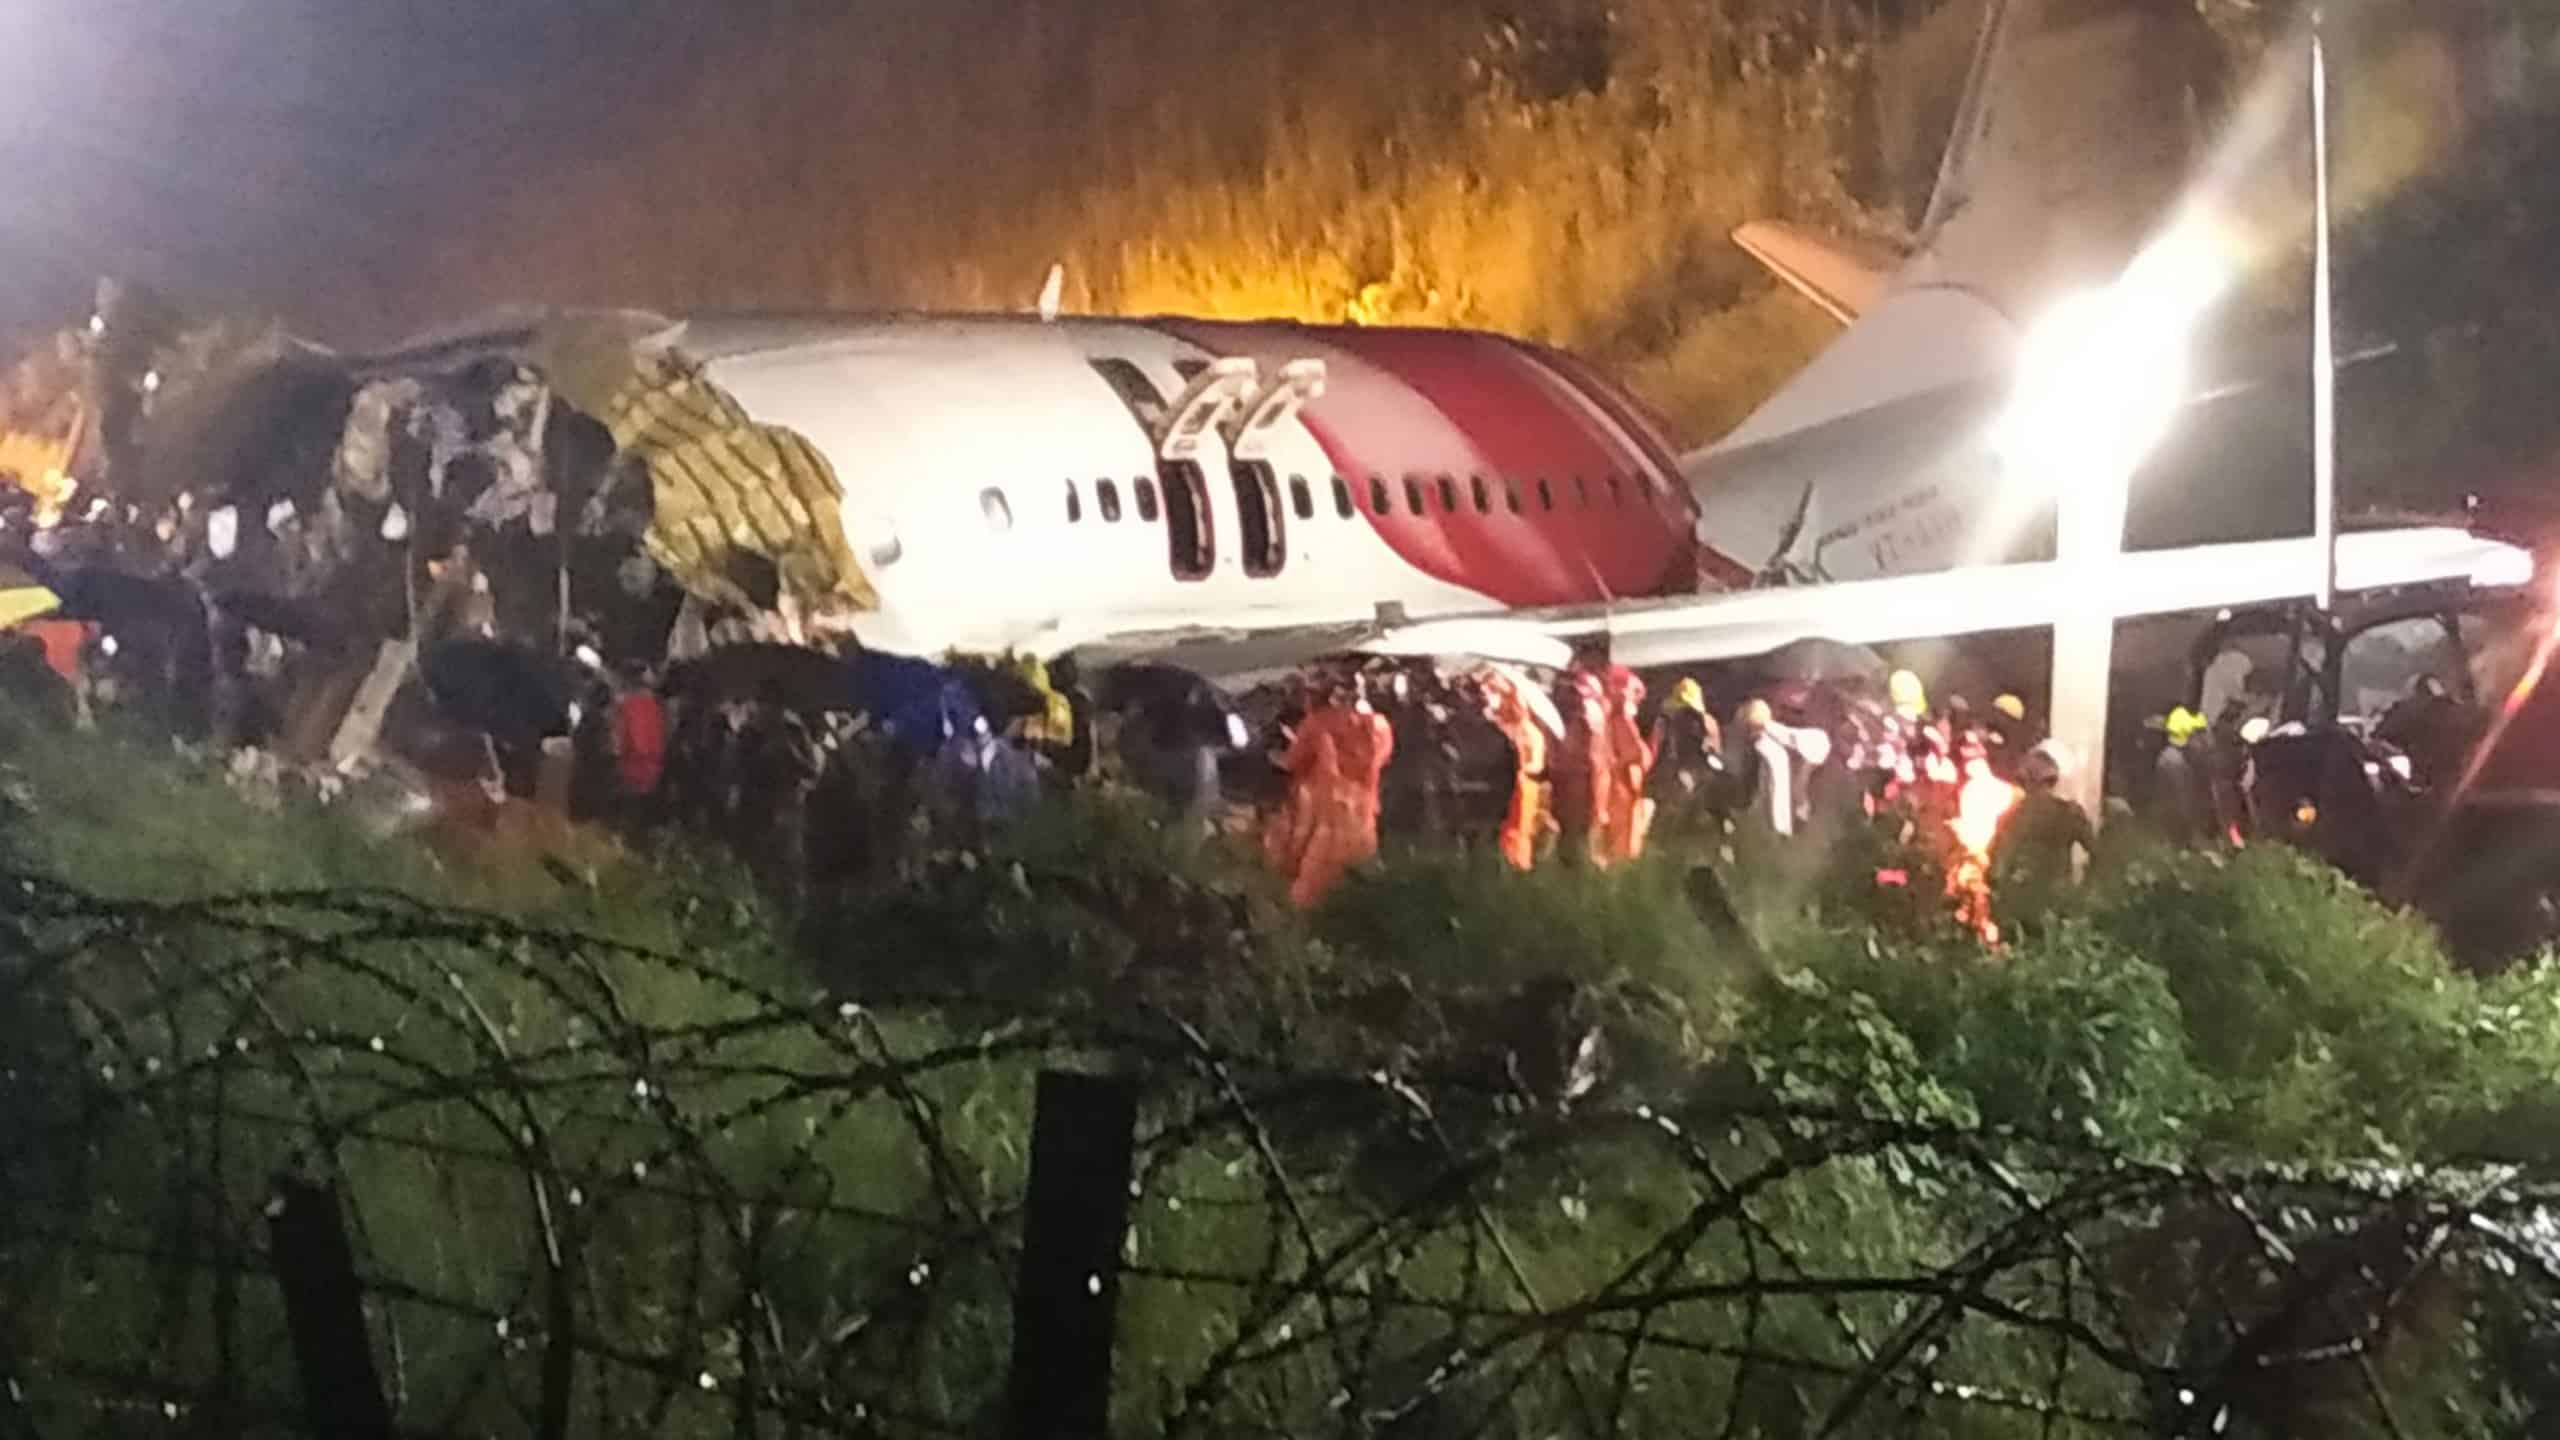 Air India Express Flight With 190 People On Board Skidded Off A Runway